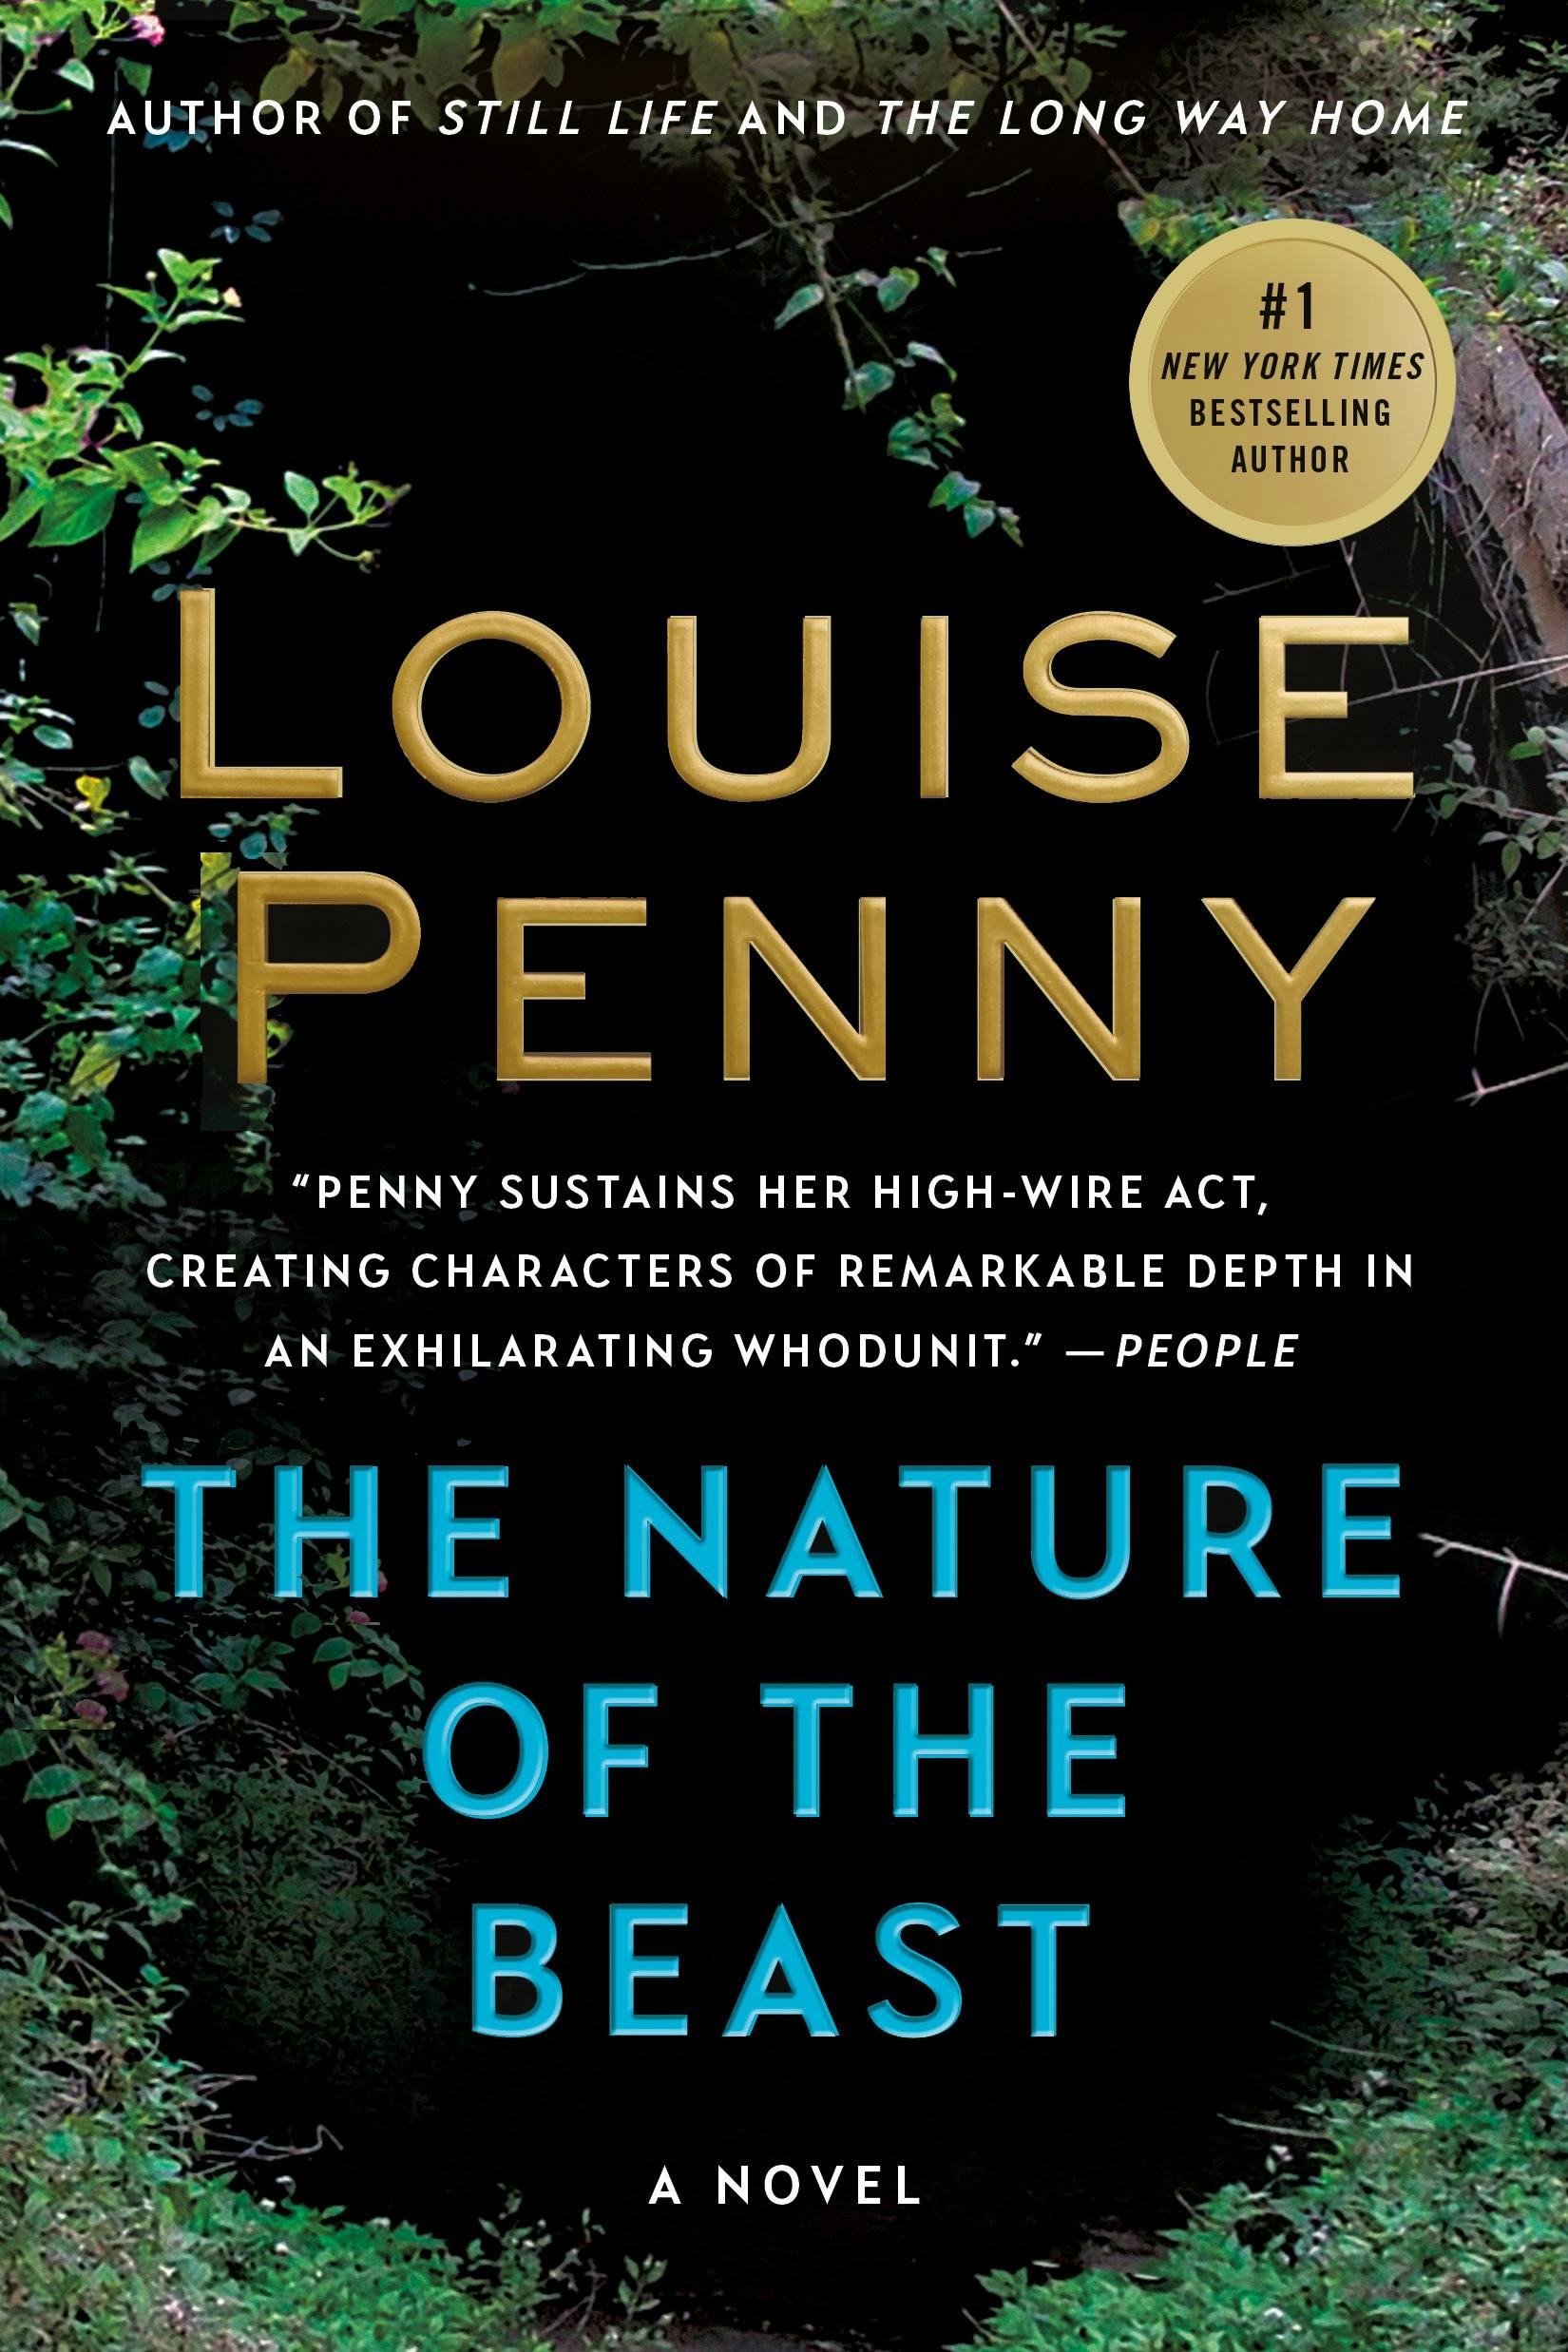 Book Report: The New Louise Penny